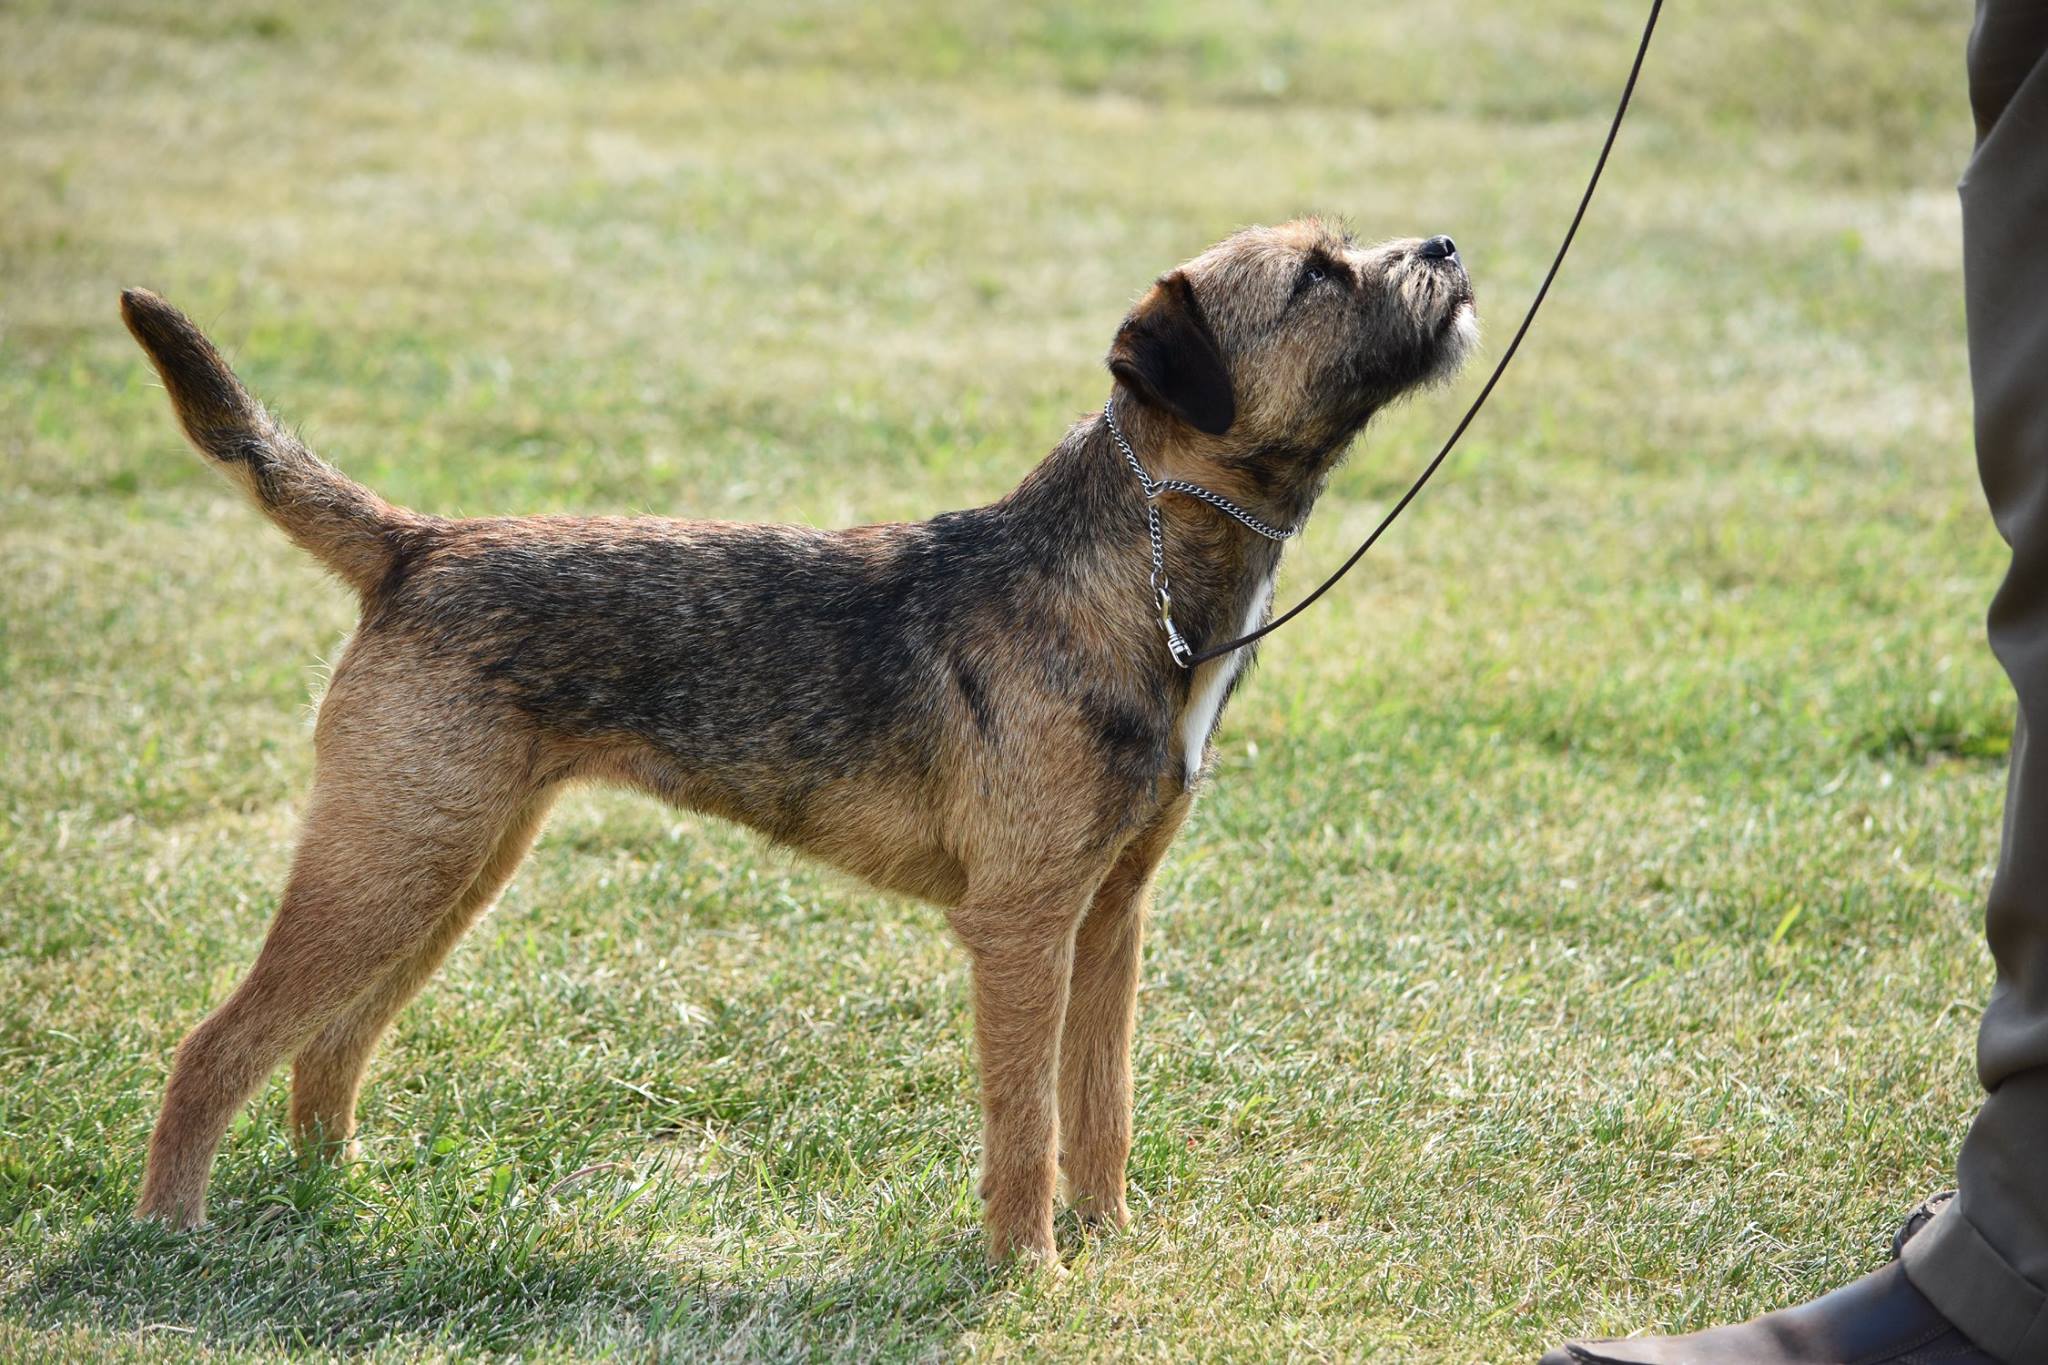 Border Terrier Picture